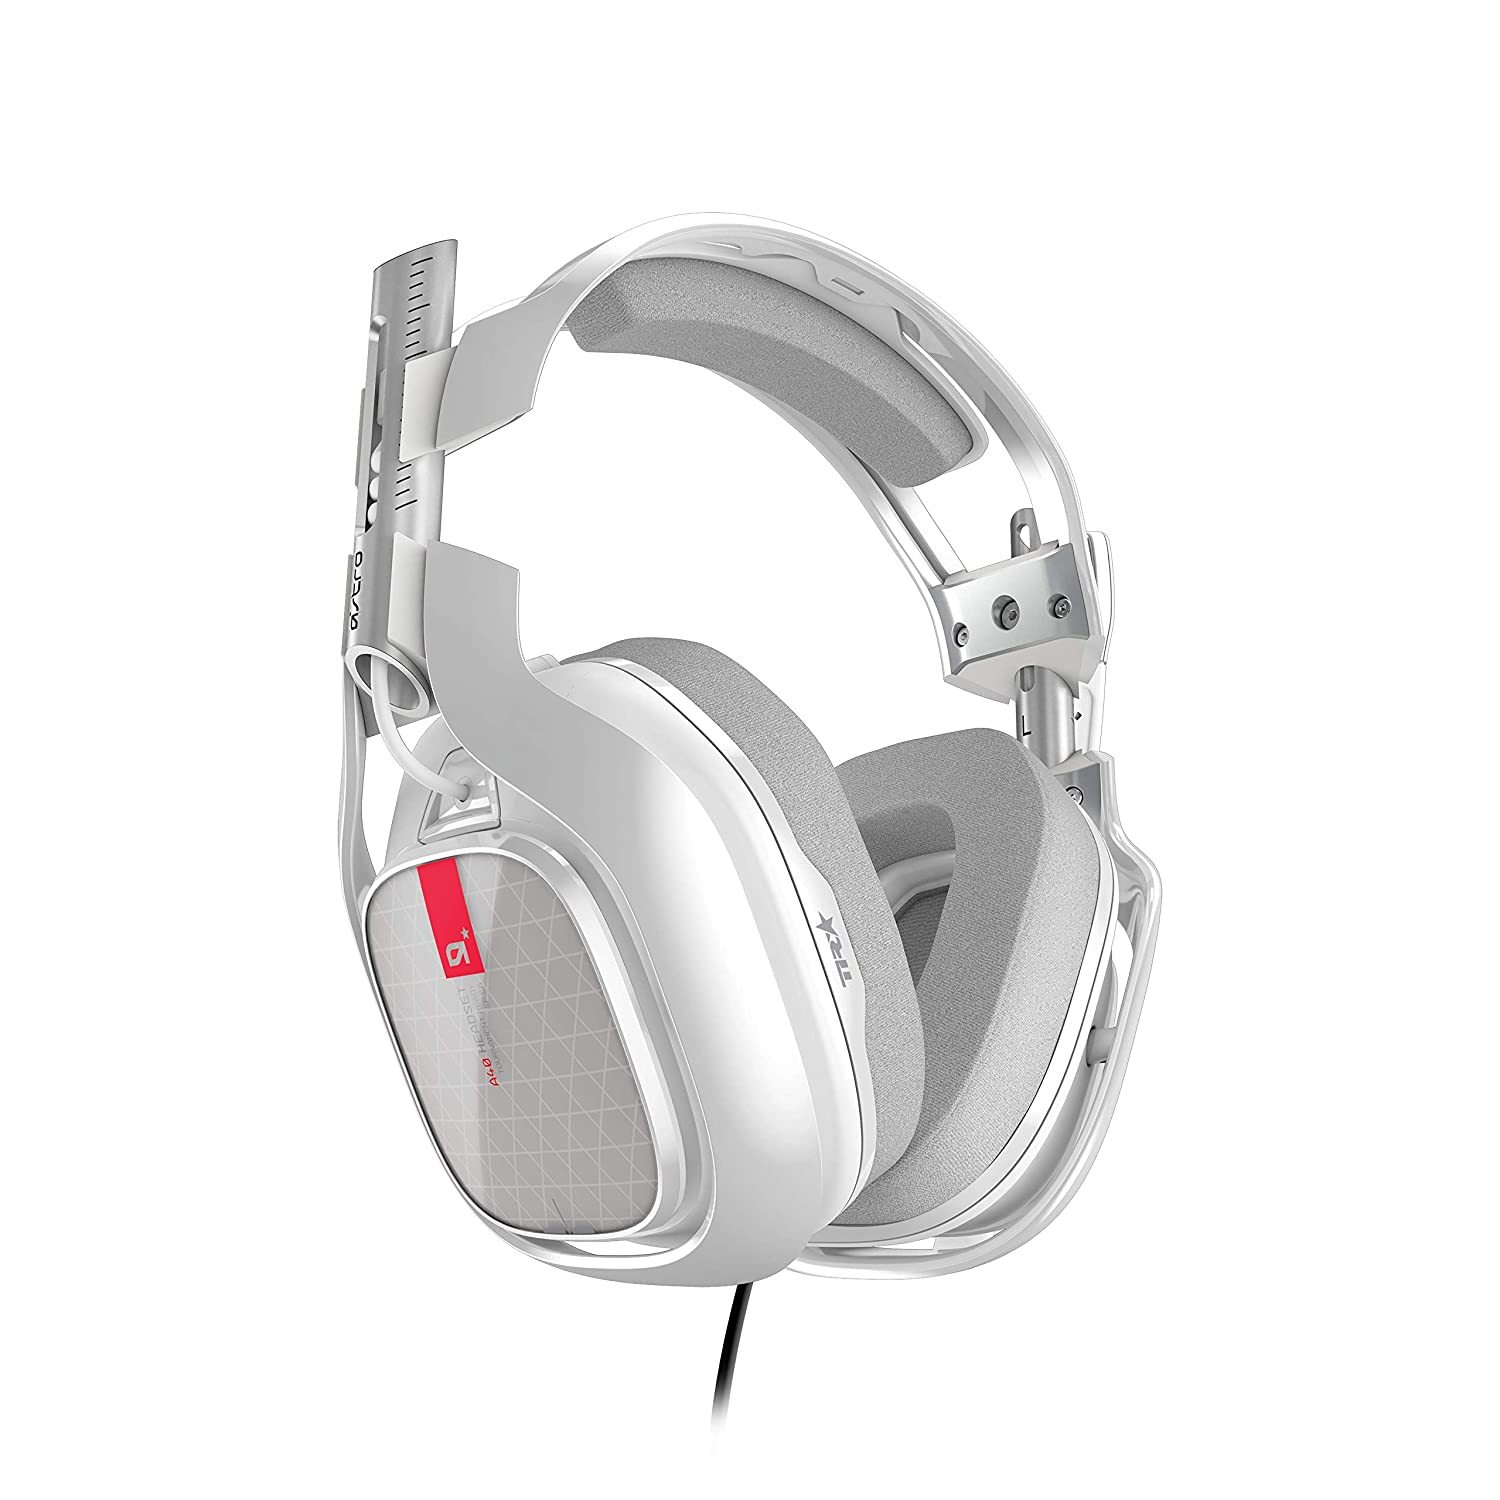 A40 Tr Gaming Headset For Pc, Mac- White (2015 Model)